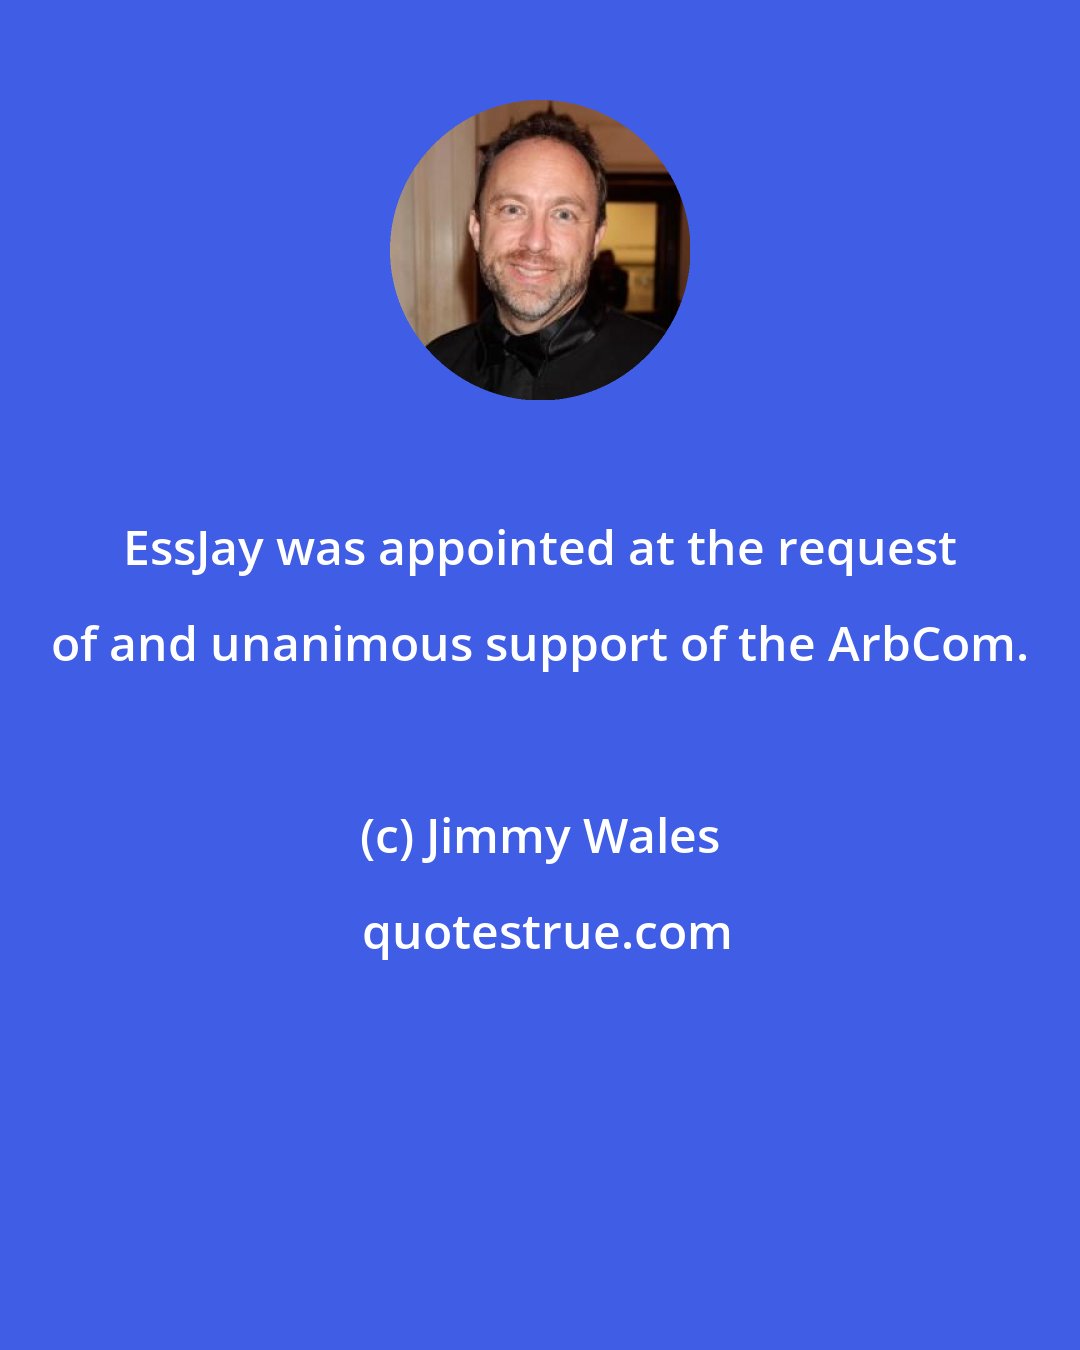 Jimmy Wales: EssJay was appointed at the request of and unanimous support of the ArbCom.